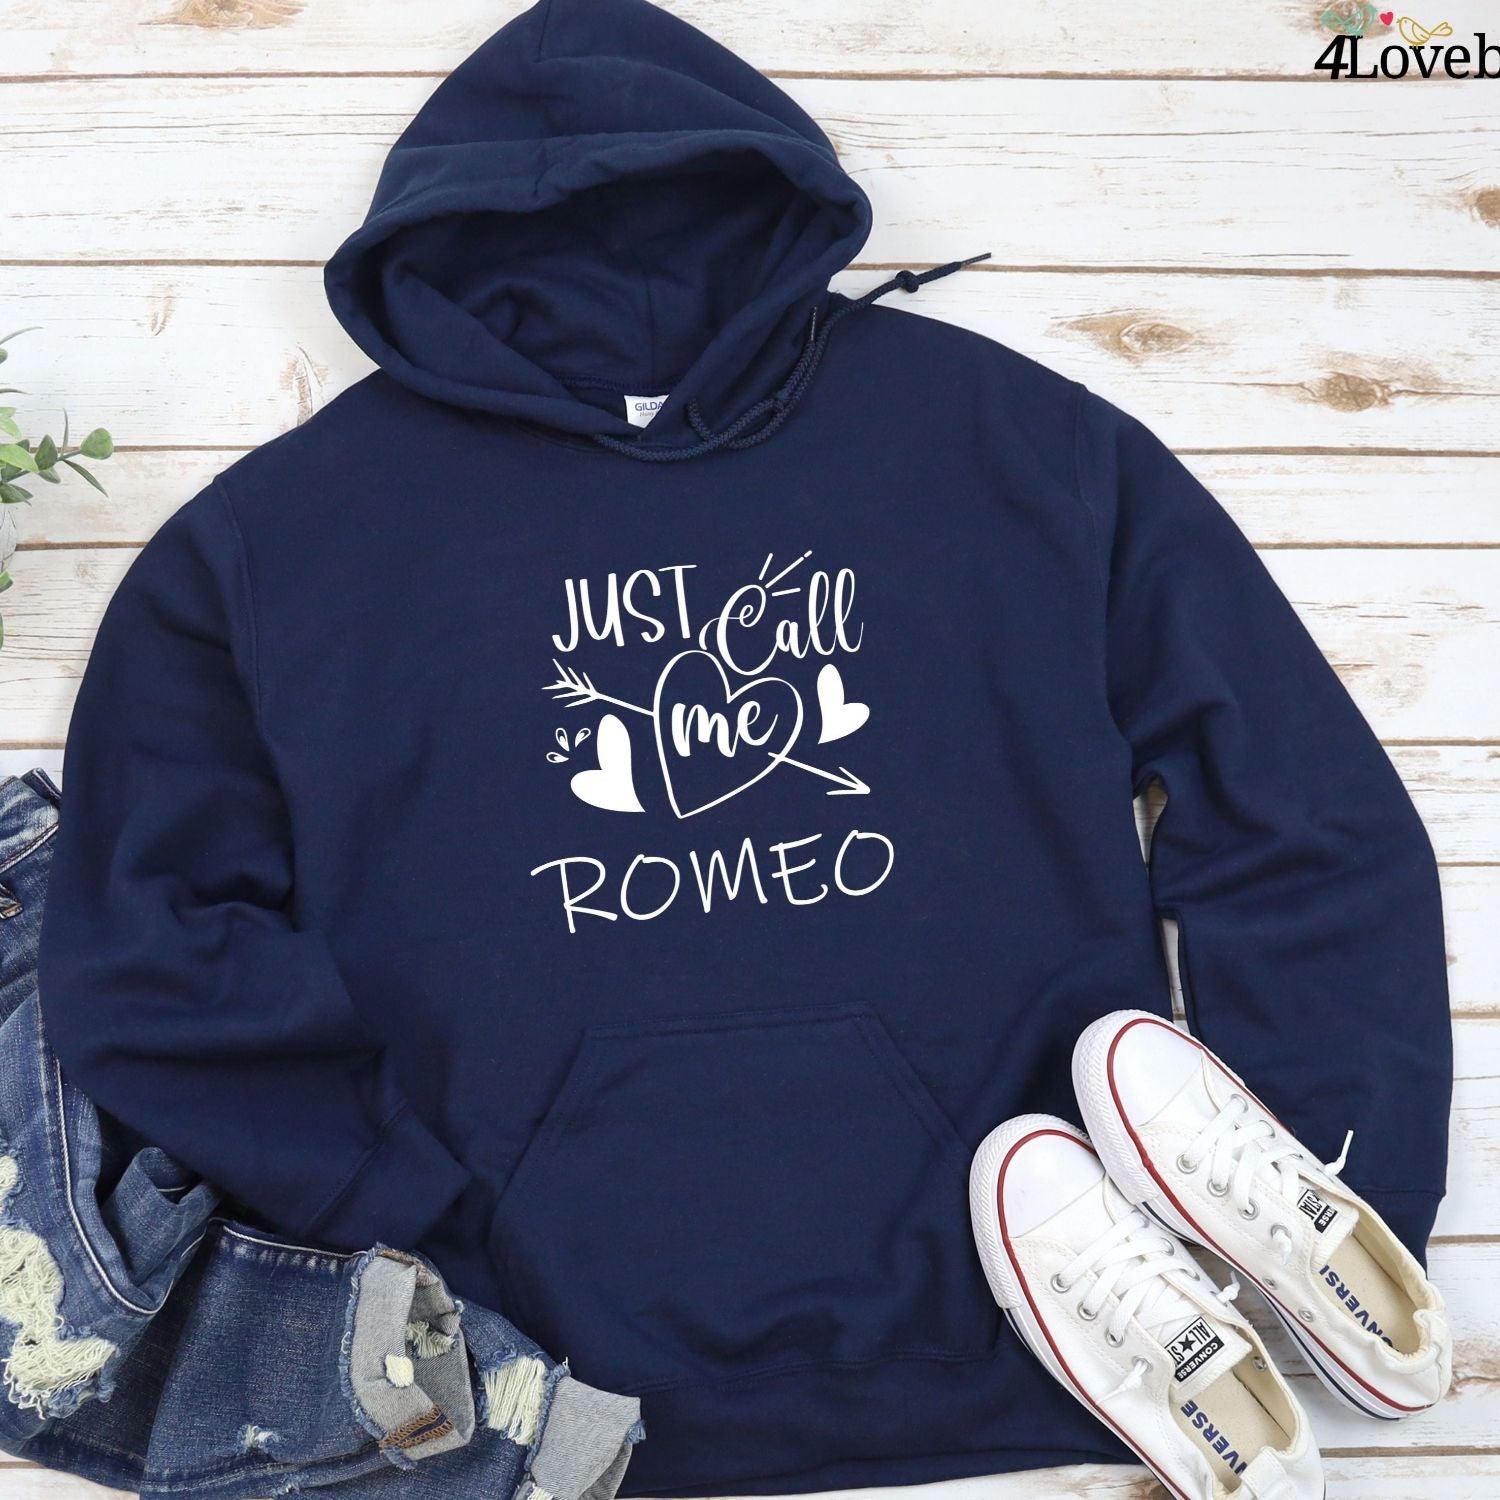 Just Call Me Juliet/Romeo: Matching Outfits for Couples, Perfect Valentine's Day Gift - 4Lovebirds